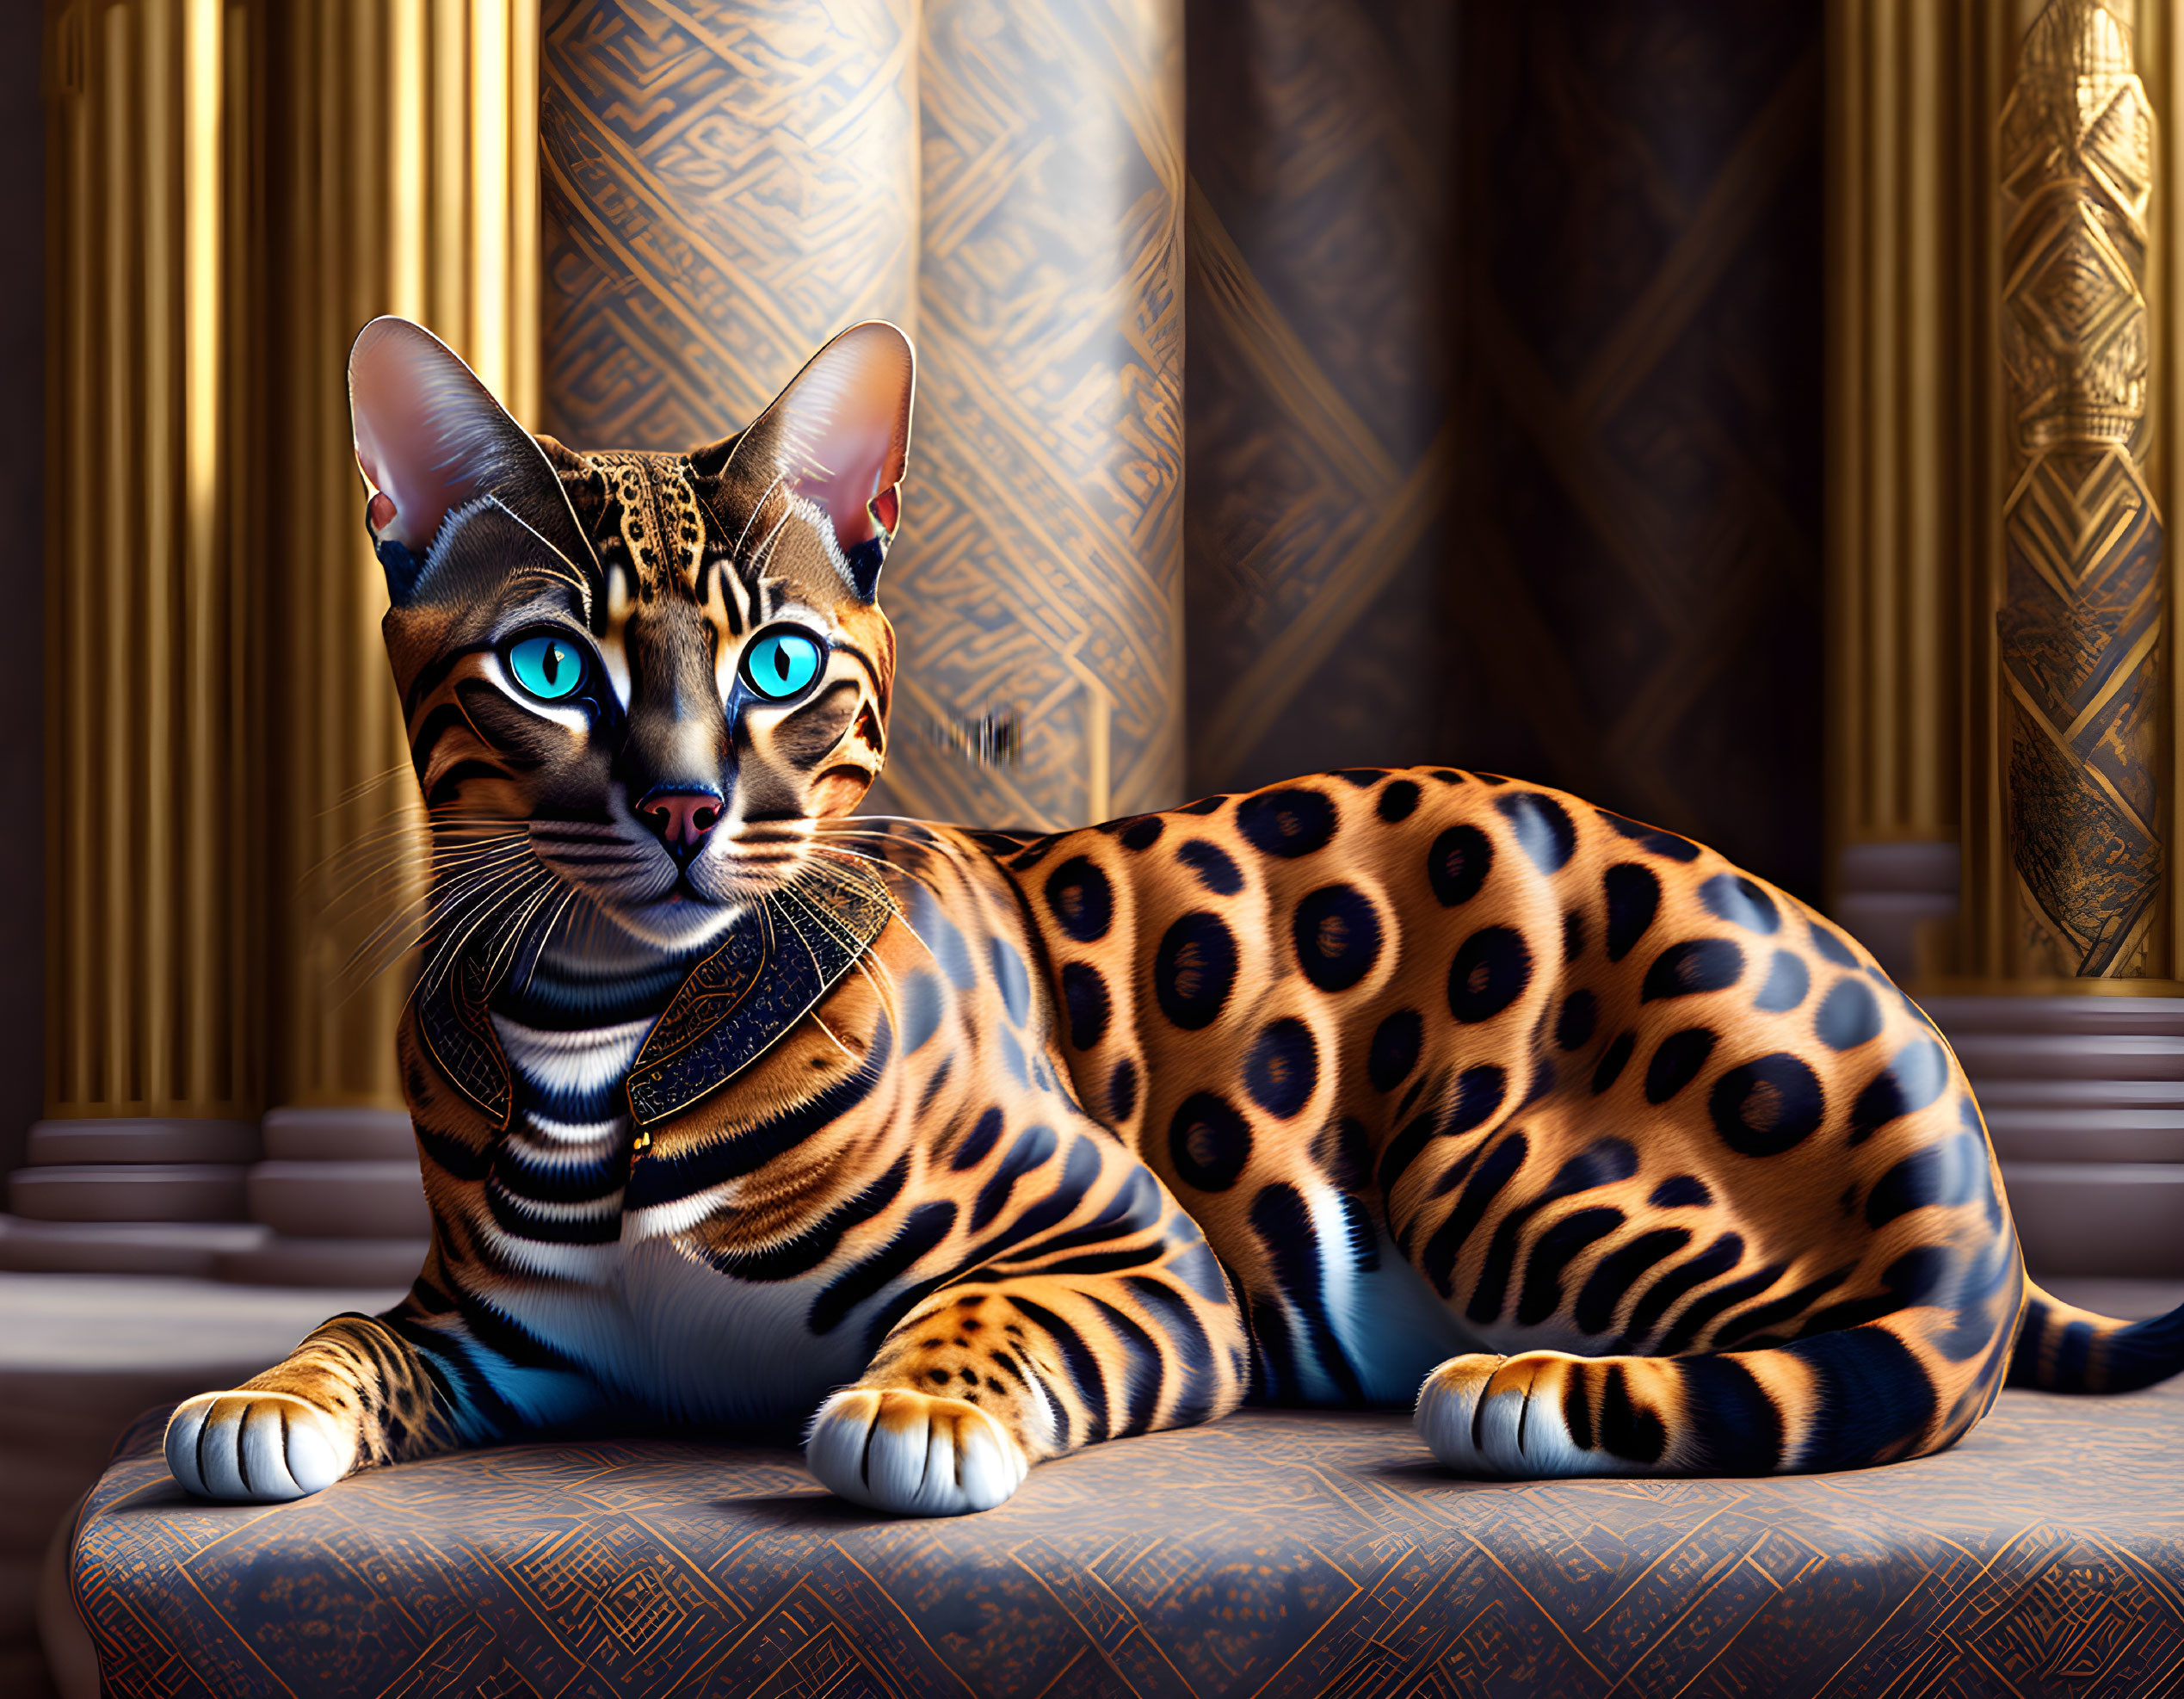 Bengal Cat with Blue Eyes and Golden Collar in Ornate Palace